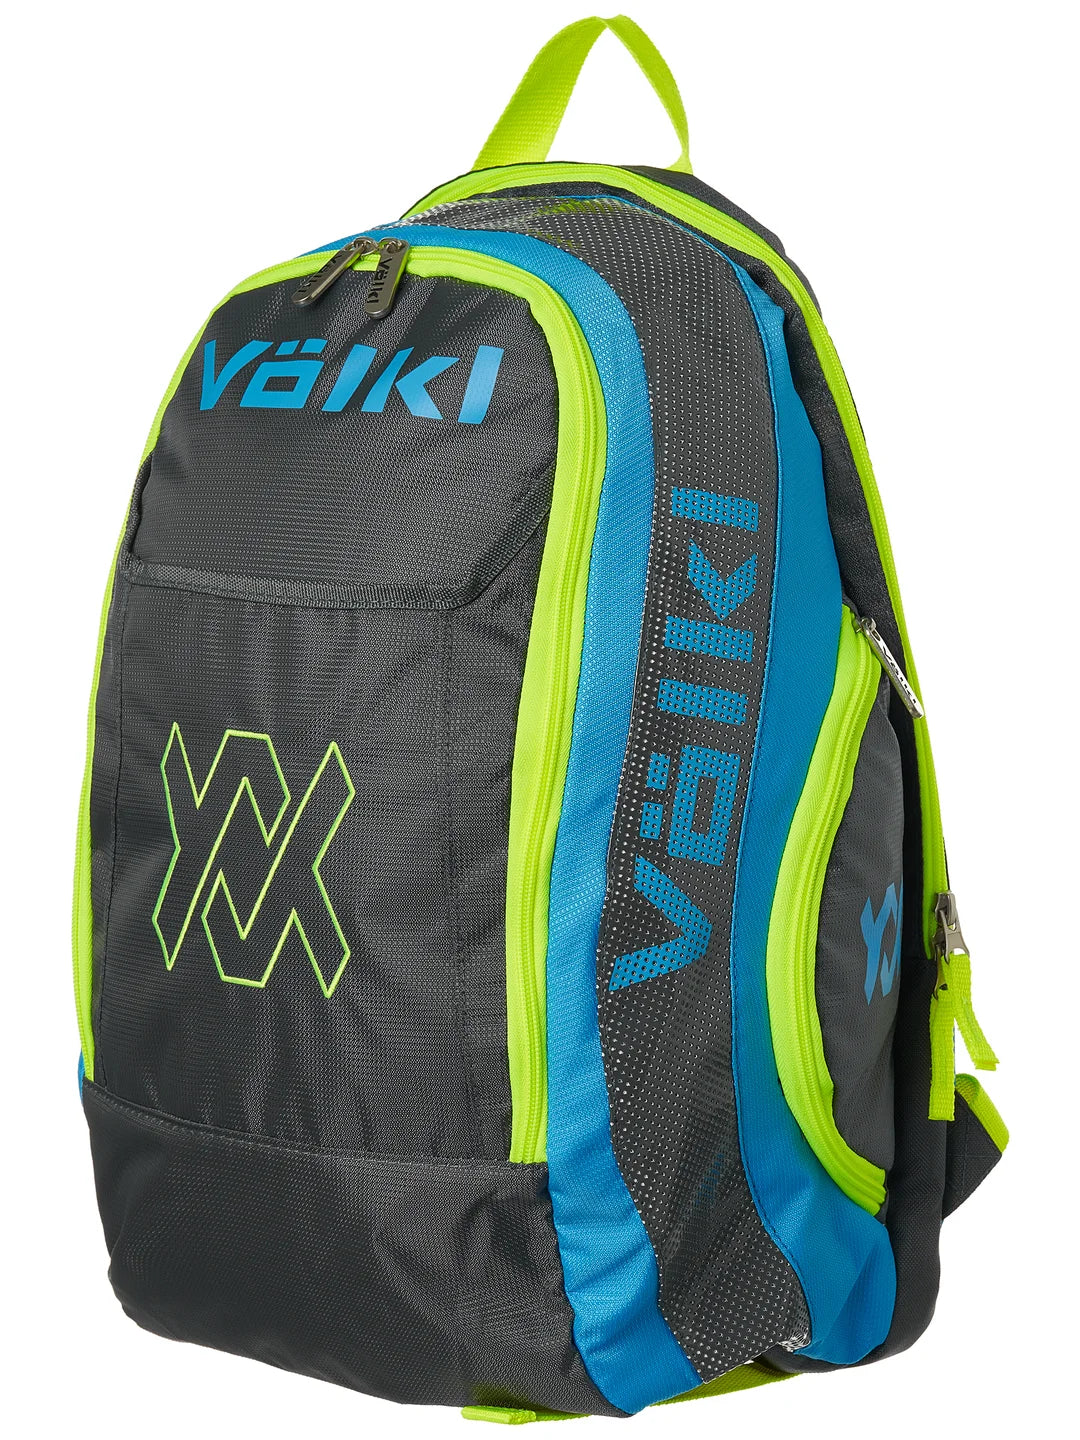 Volkl-tour backpack charcoal/neon blue/neon